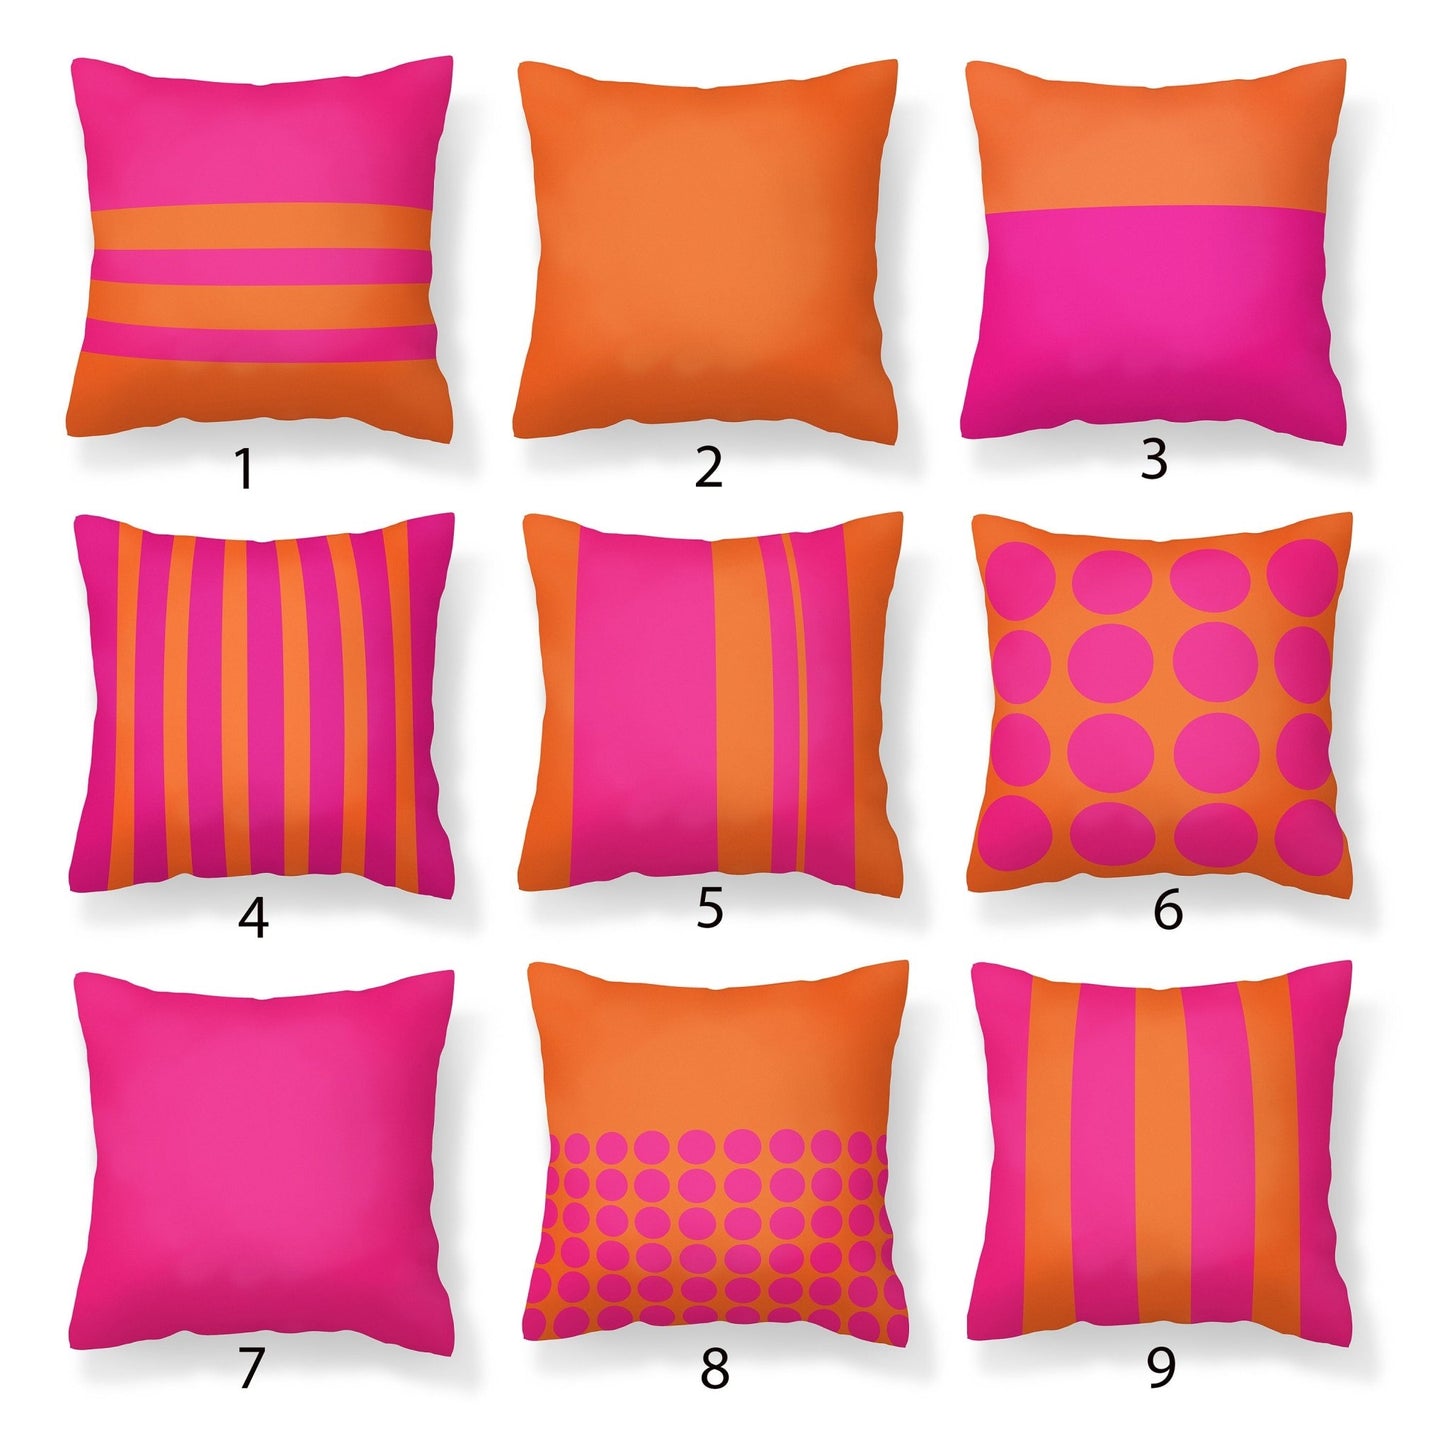 Orange and Pink Outdoor Pillows for Porch or Patio